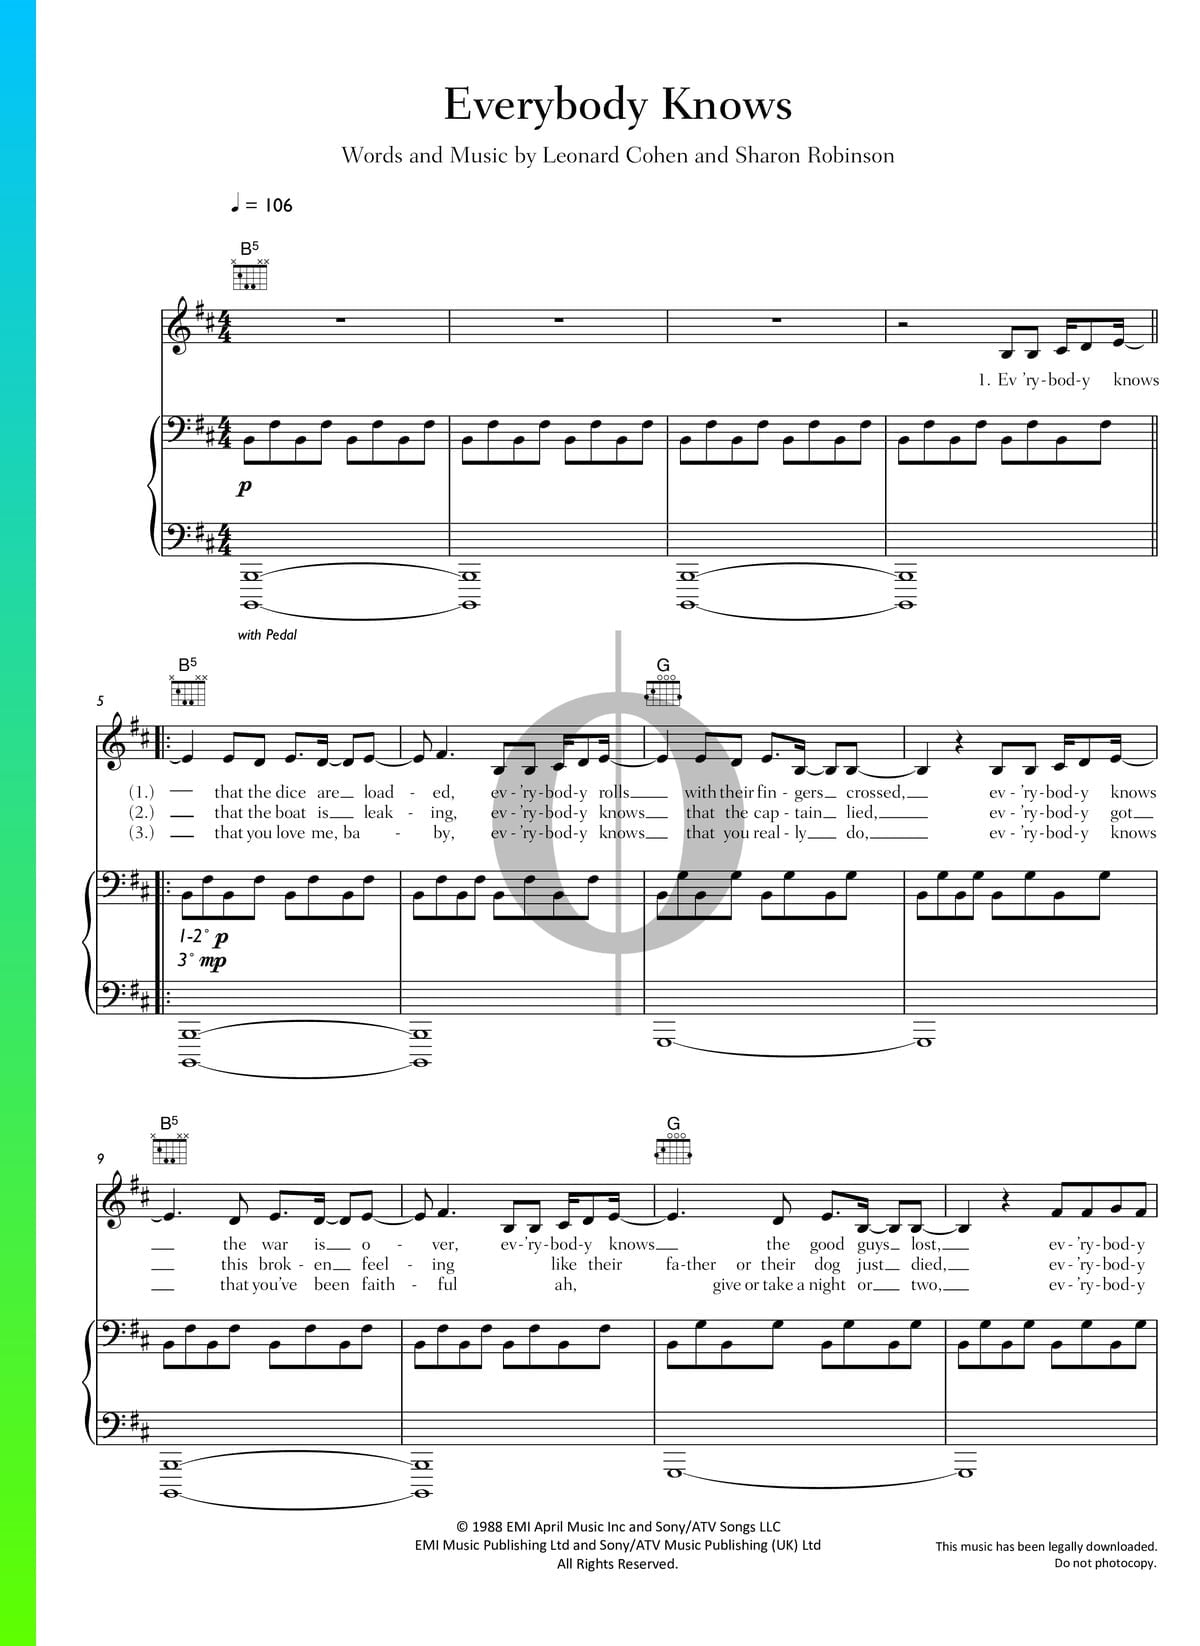 ▷ Everybody Wants To Rule The World Sheet Music (Piano, Guitar, Voice) -  OKTAV